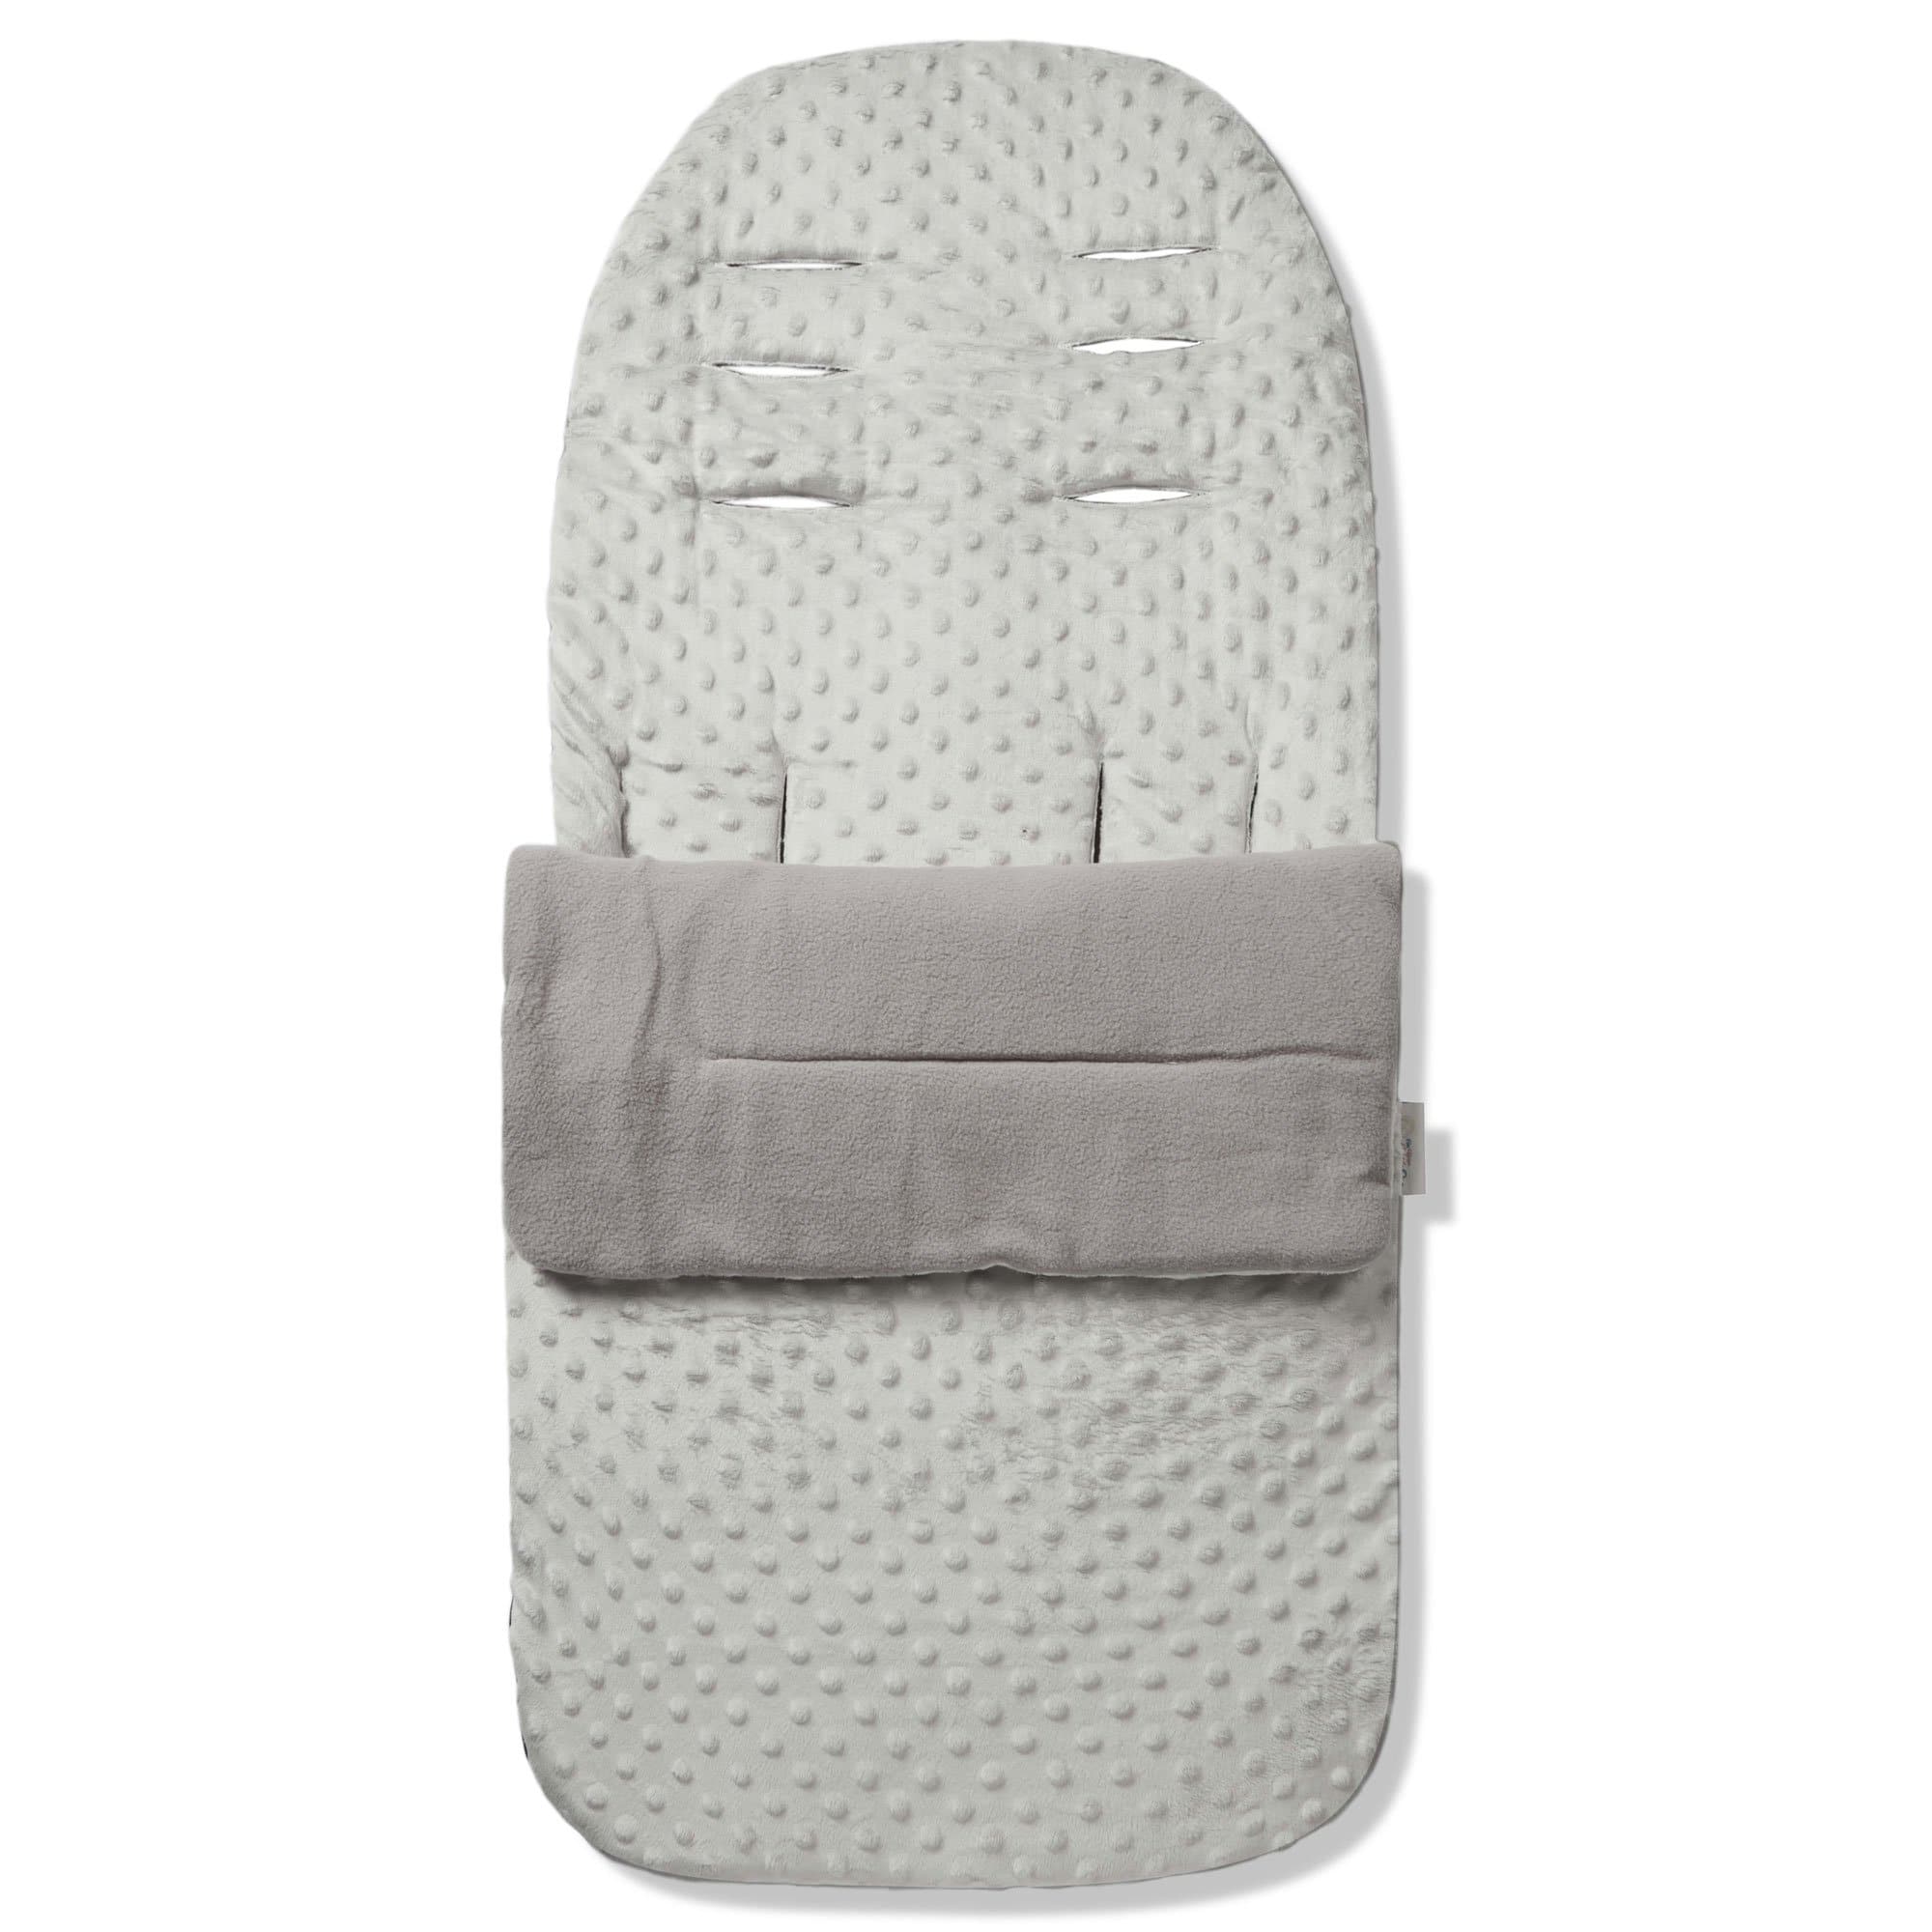 Dimple Footmuff / Cosy Toes Compatible with Joie - Grey / Fits All Models | For Your Little One